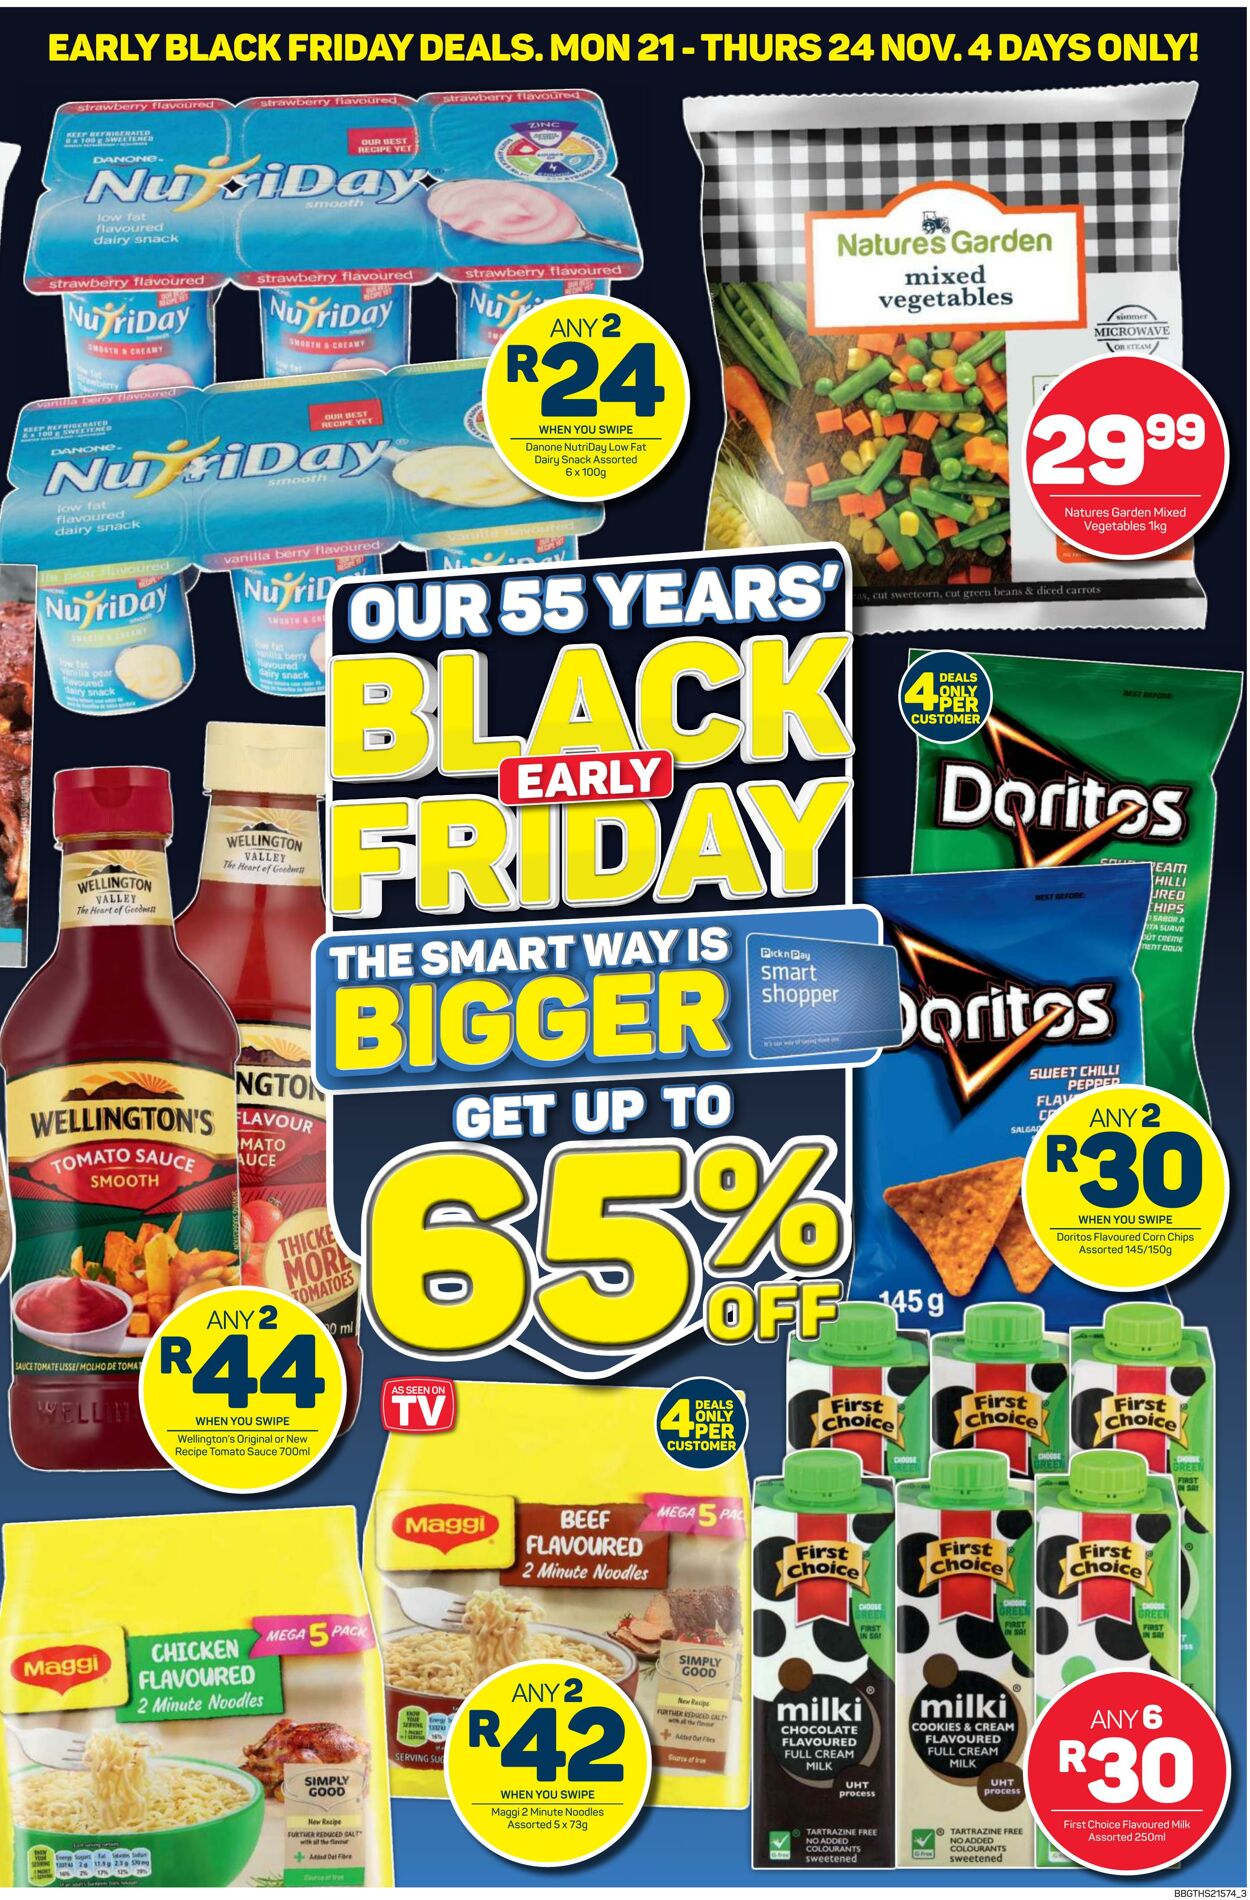 Special Pick n Pay 21.11.2022 - 24.11.2022